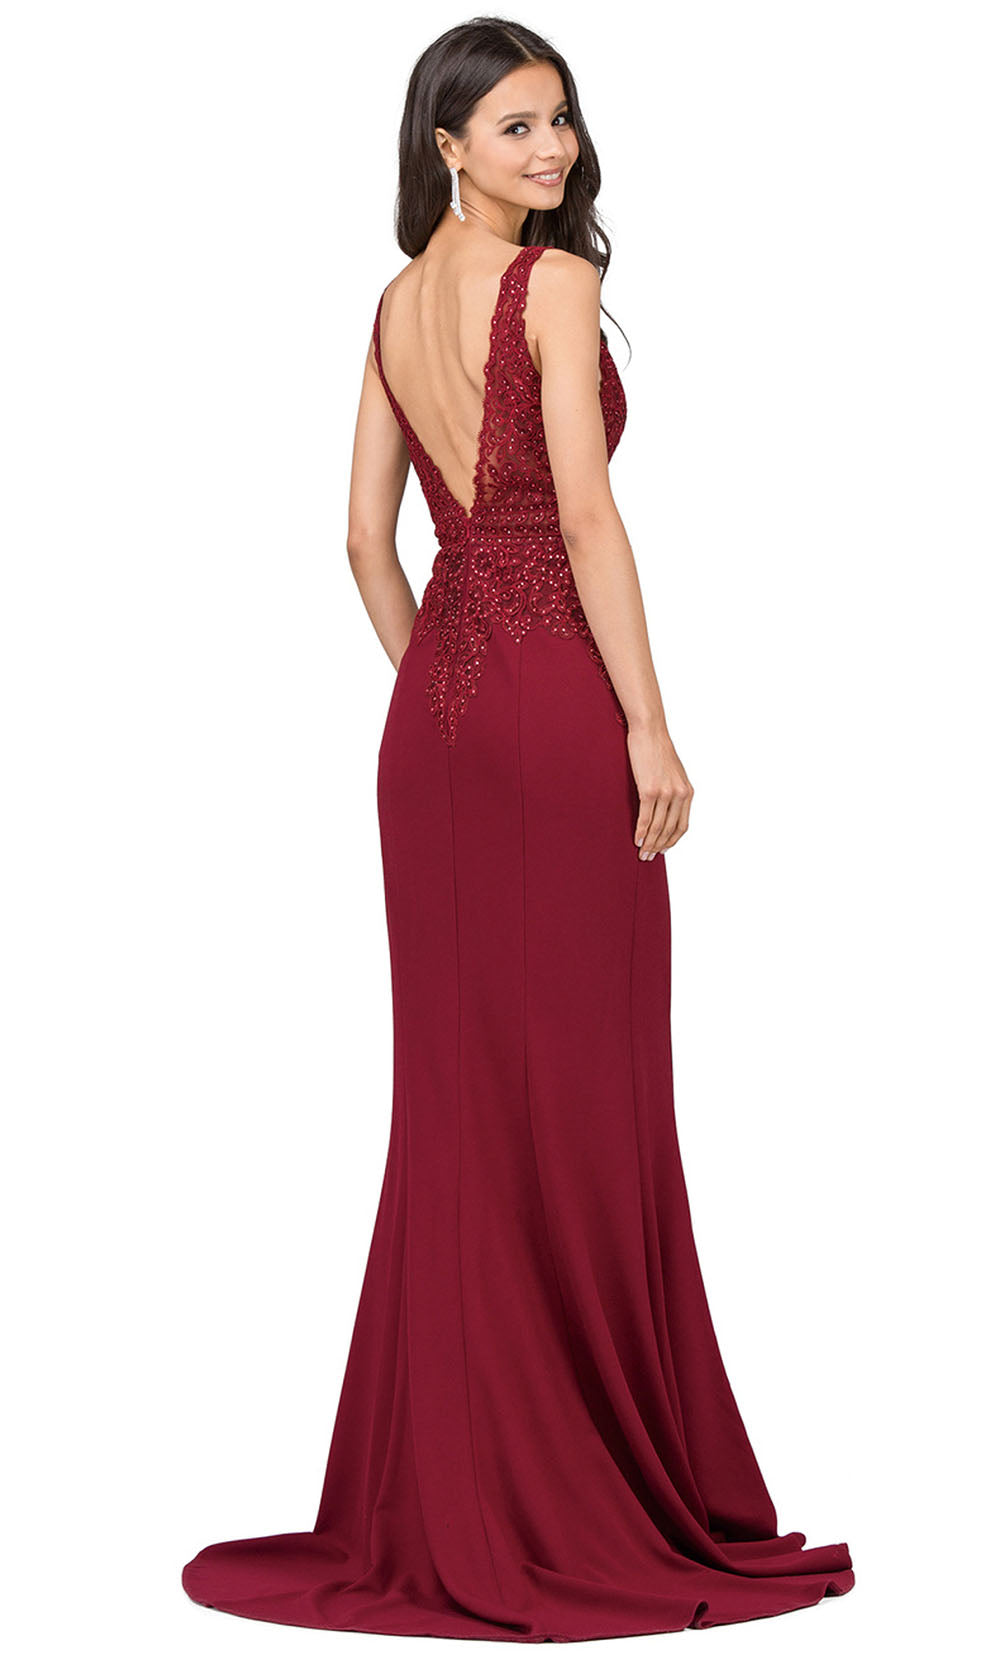 Dancing Queen - 2392 Sleeveless Beaded Lace Bodice Evening Dress In Burgundy